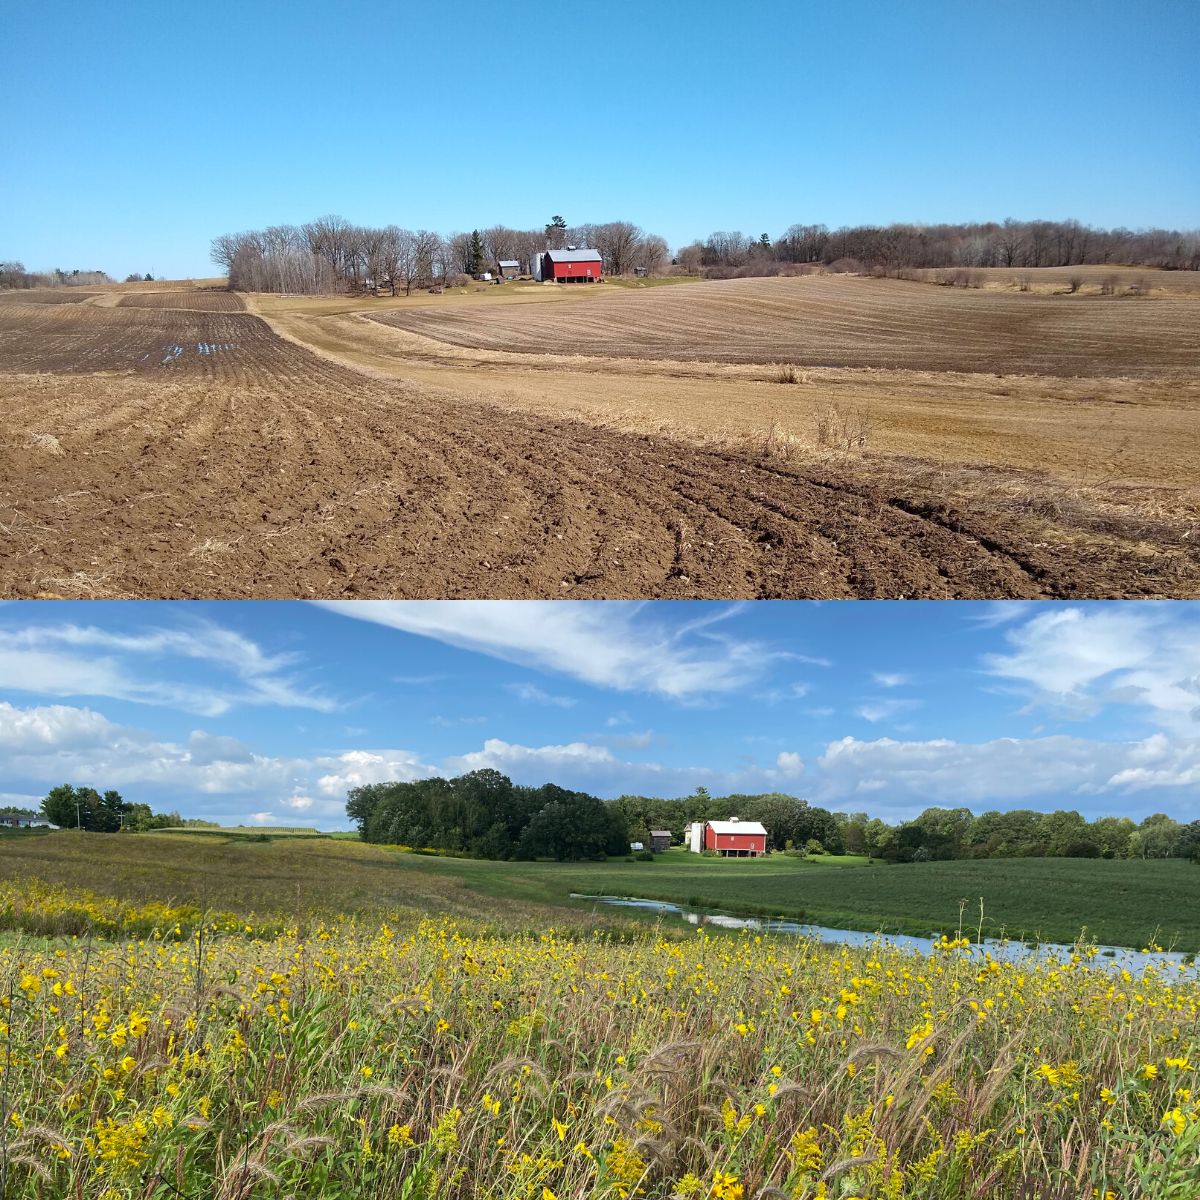 Before and after image showing a barren, plowed farm field with a red barn in the background beside a prairie teeming with yellow flowers and a small pond